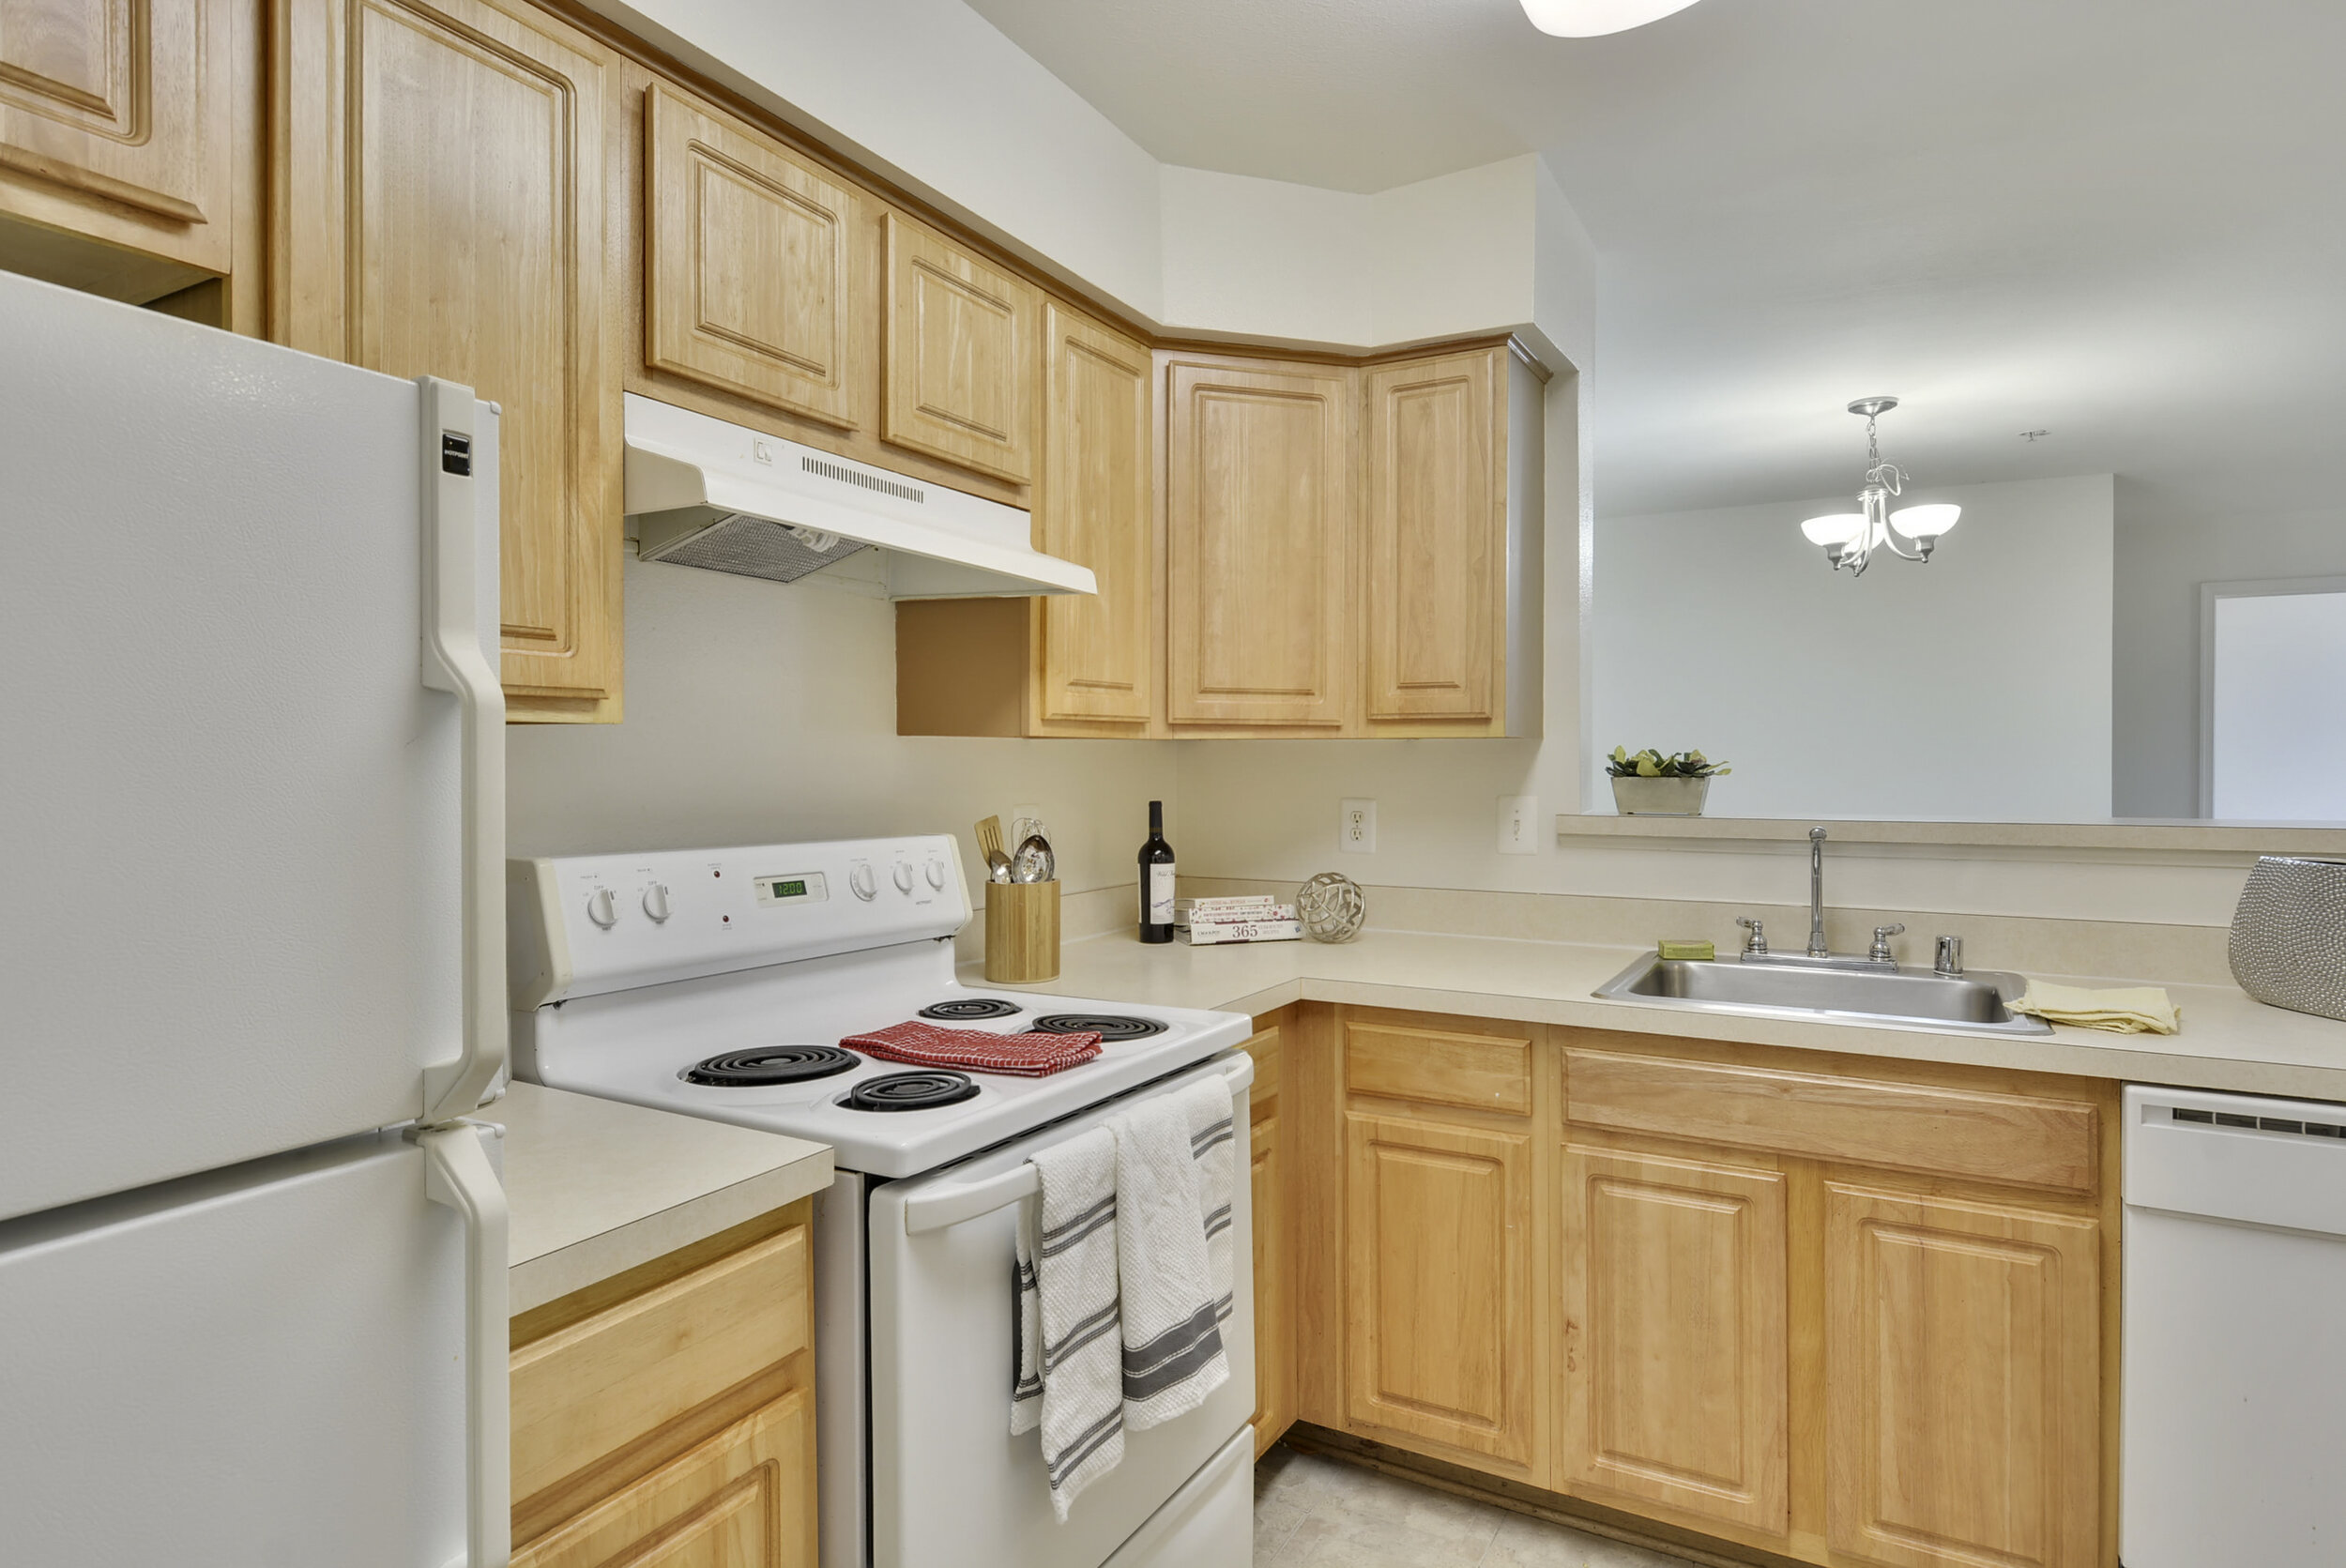  Potomac Station apartments come with GE kitchen appliances. 